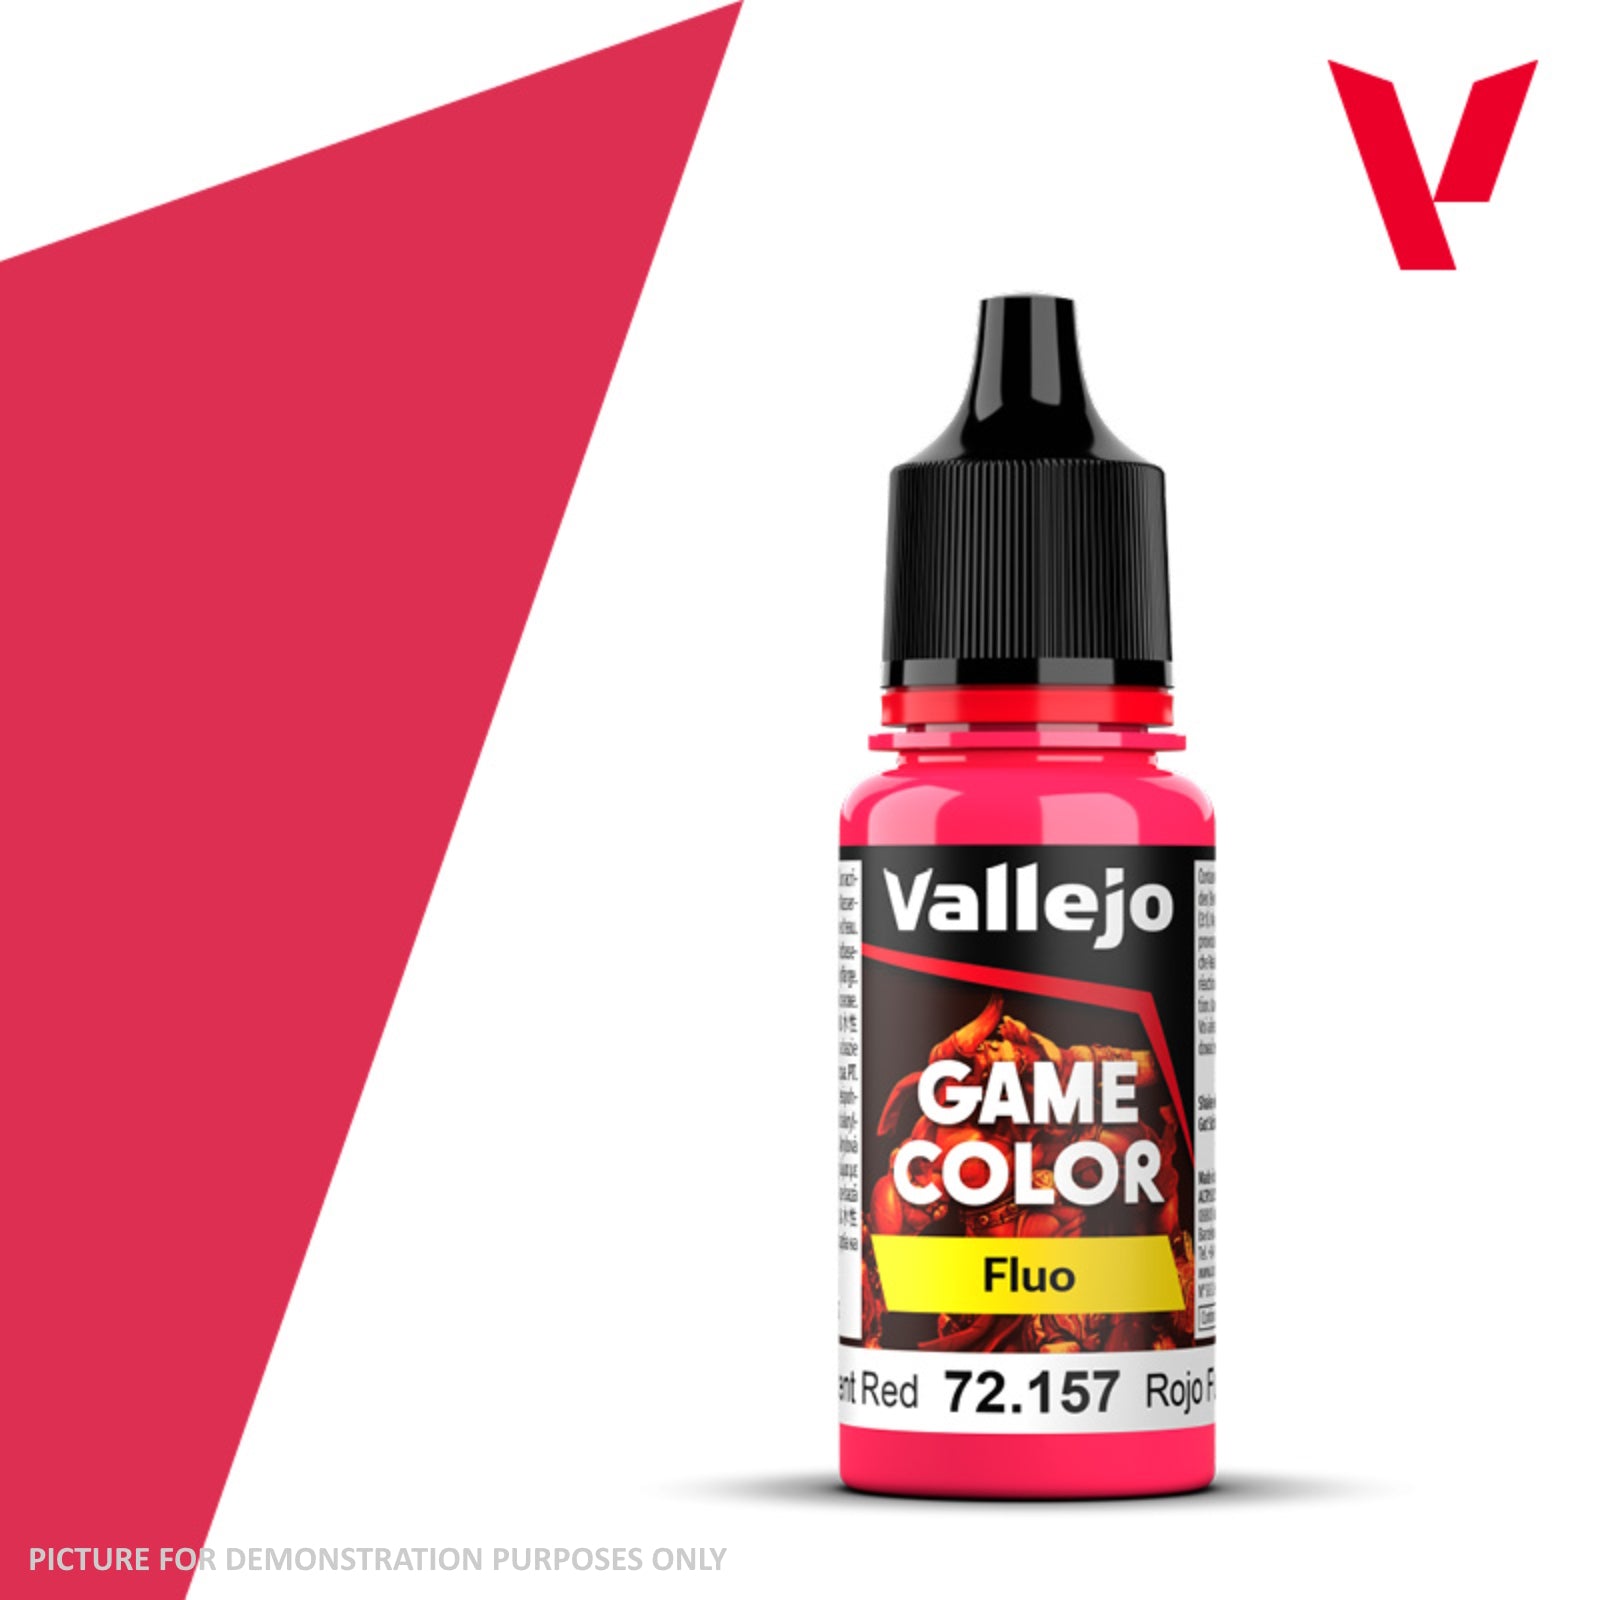 Vallejo Game Colour Fluo - 72.157 Red 18ml